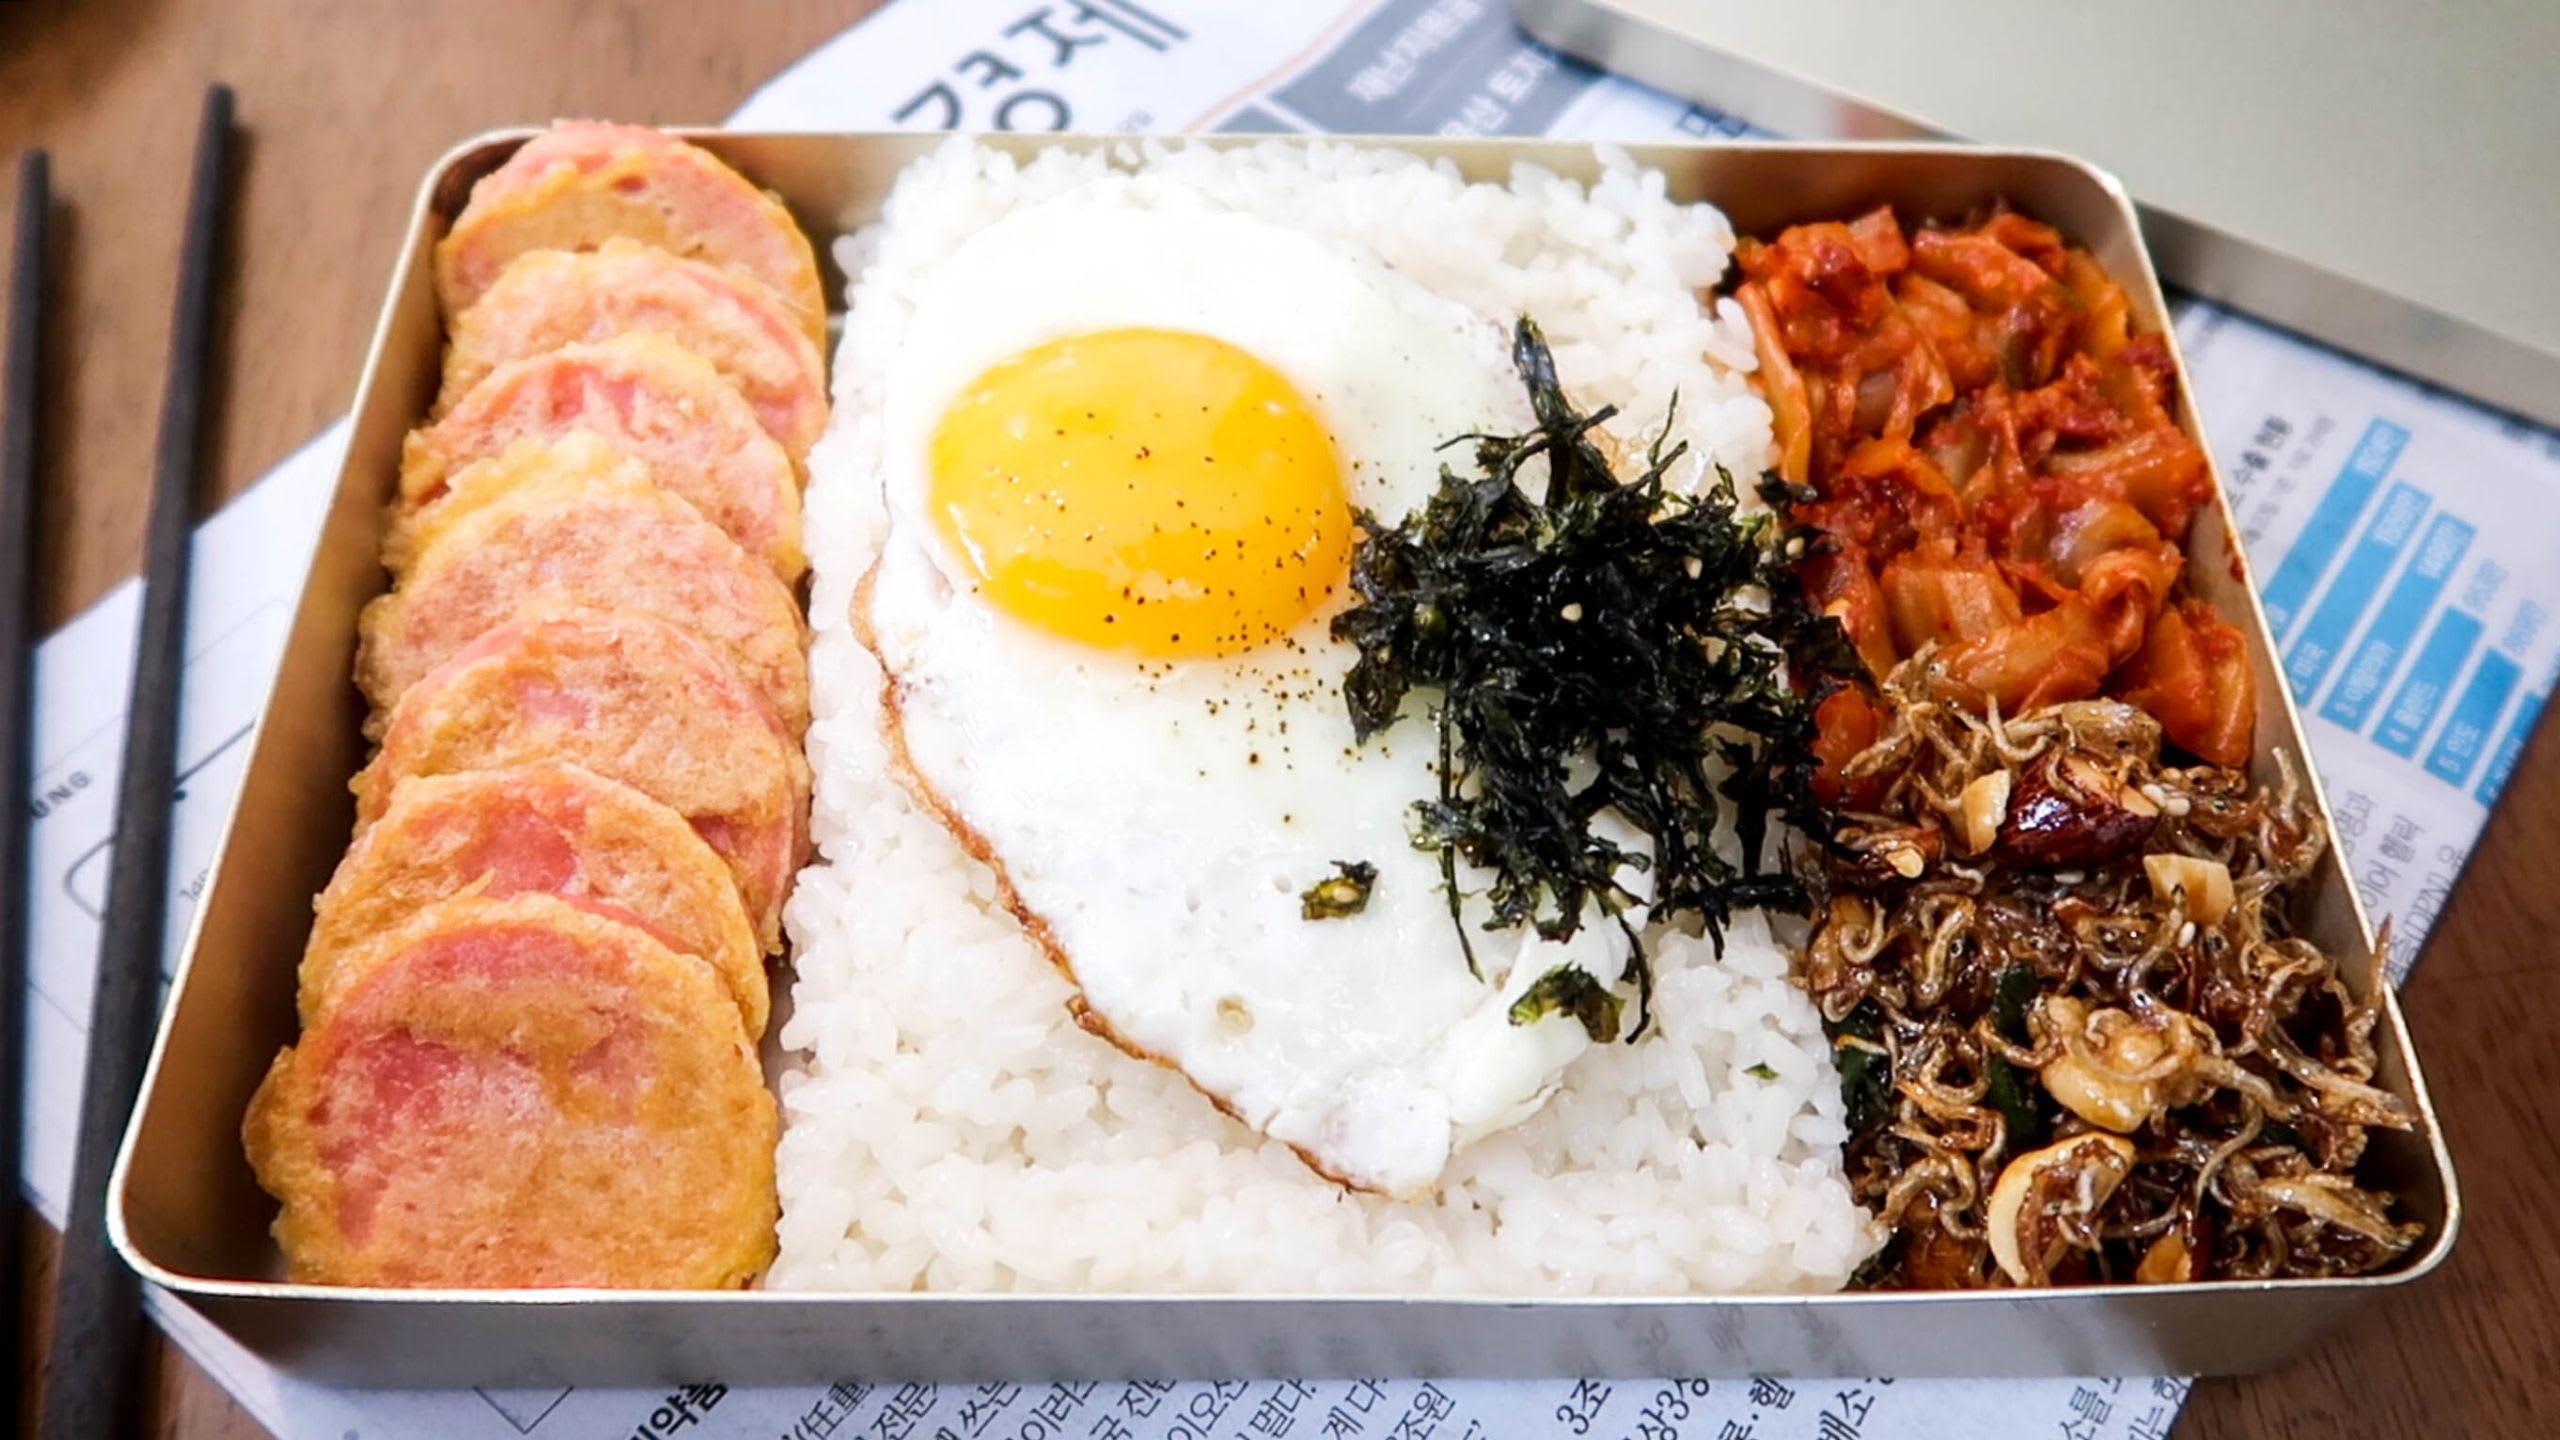 This Classic Korean Lunch Box Is Meant to Be Shaken